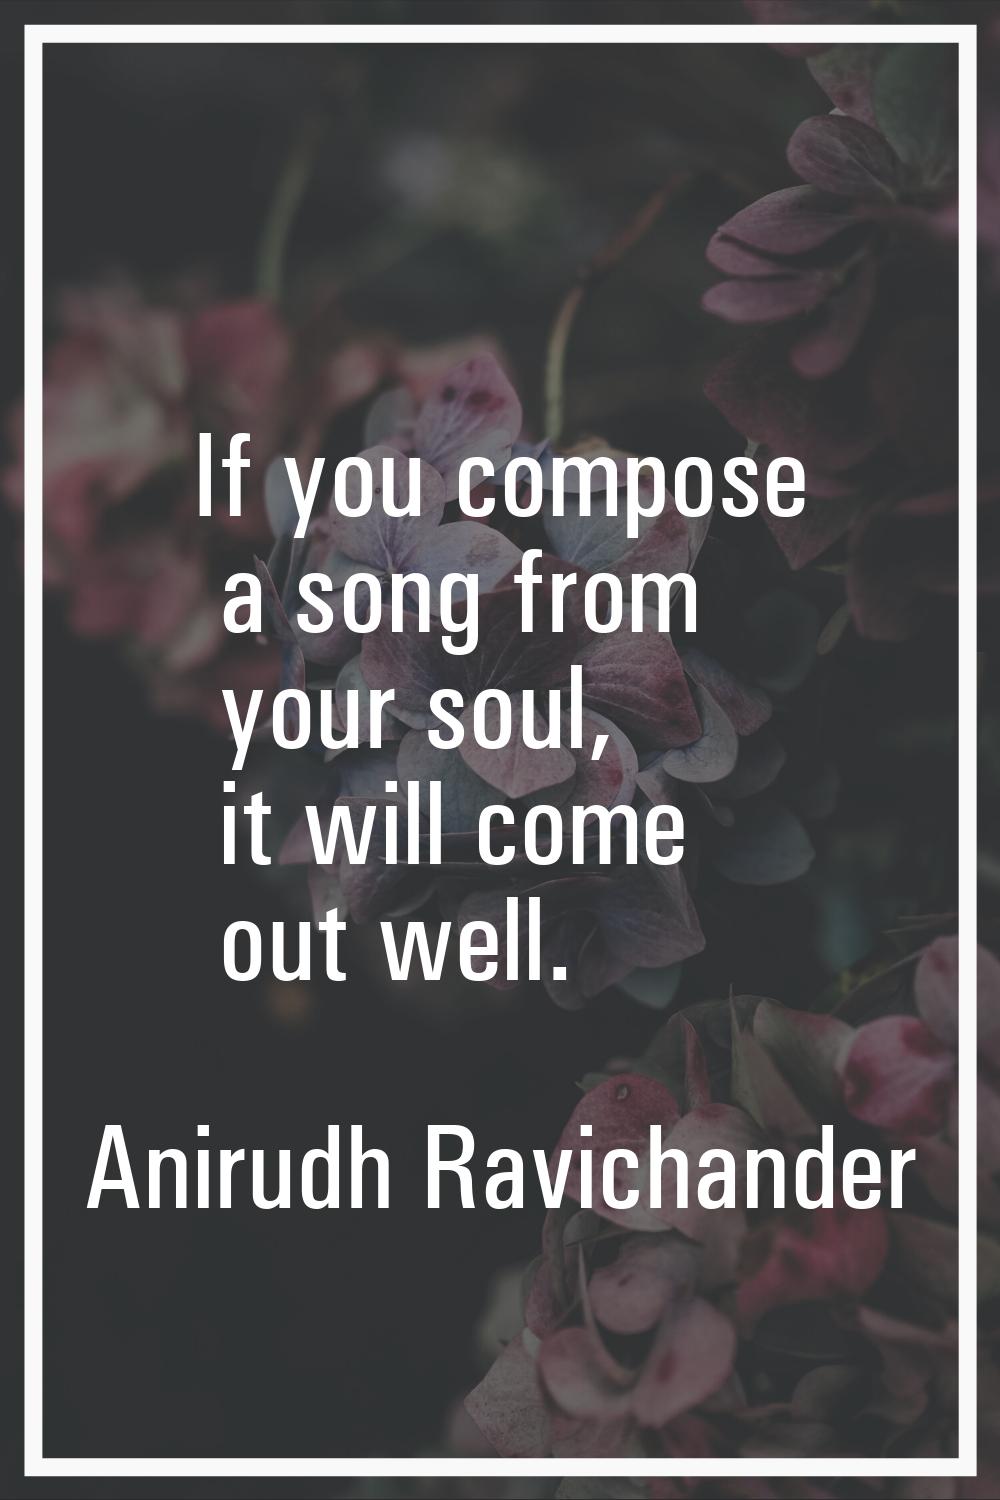 If you compose a song from your soul, it will come out well.